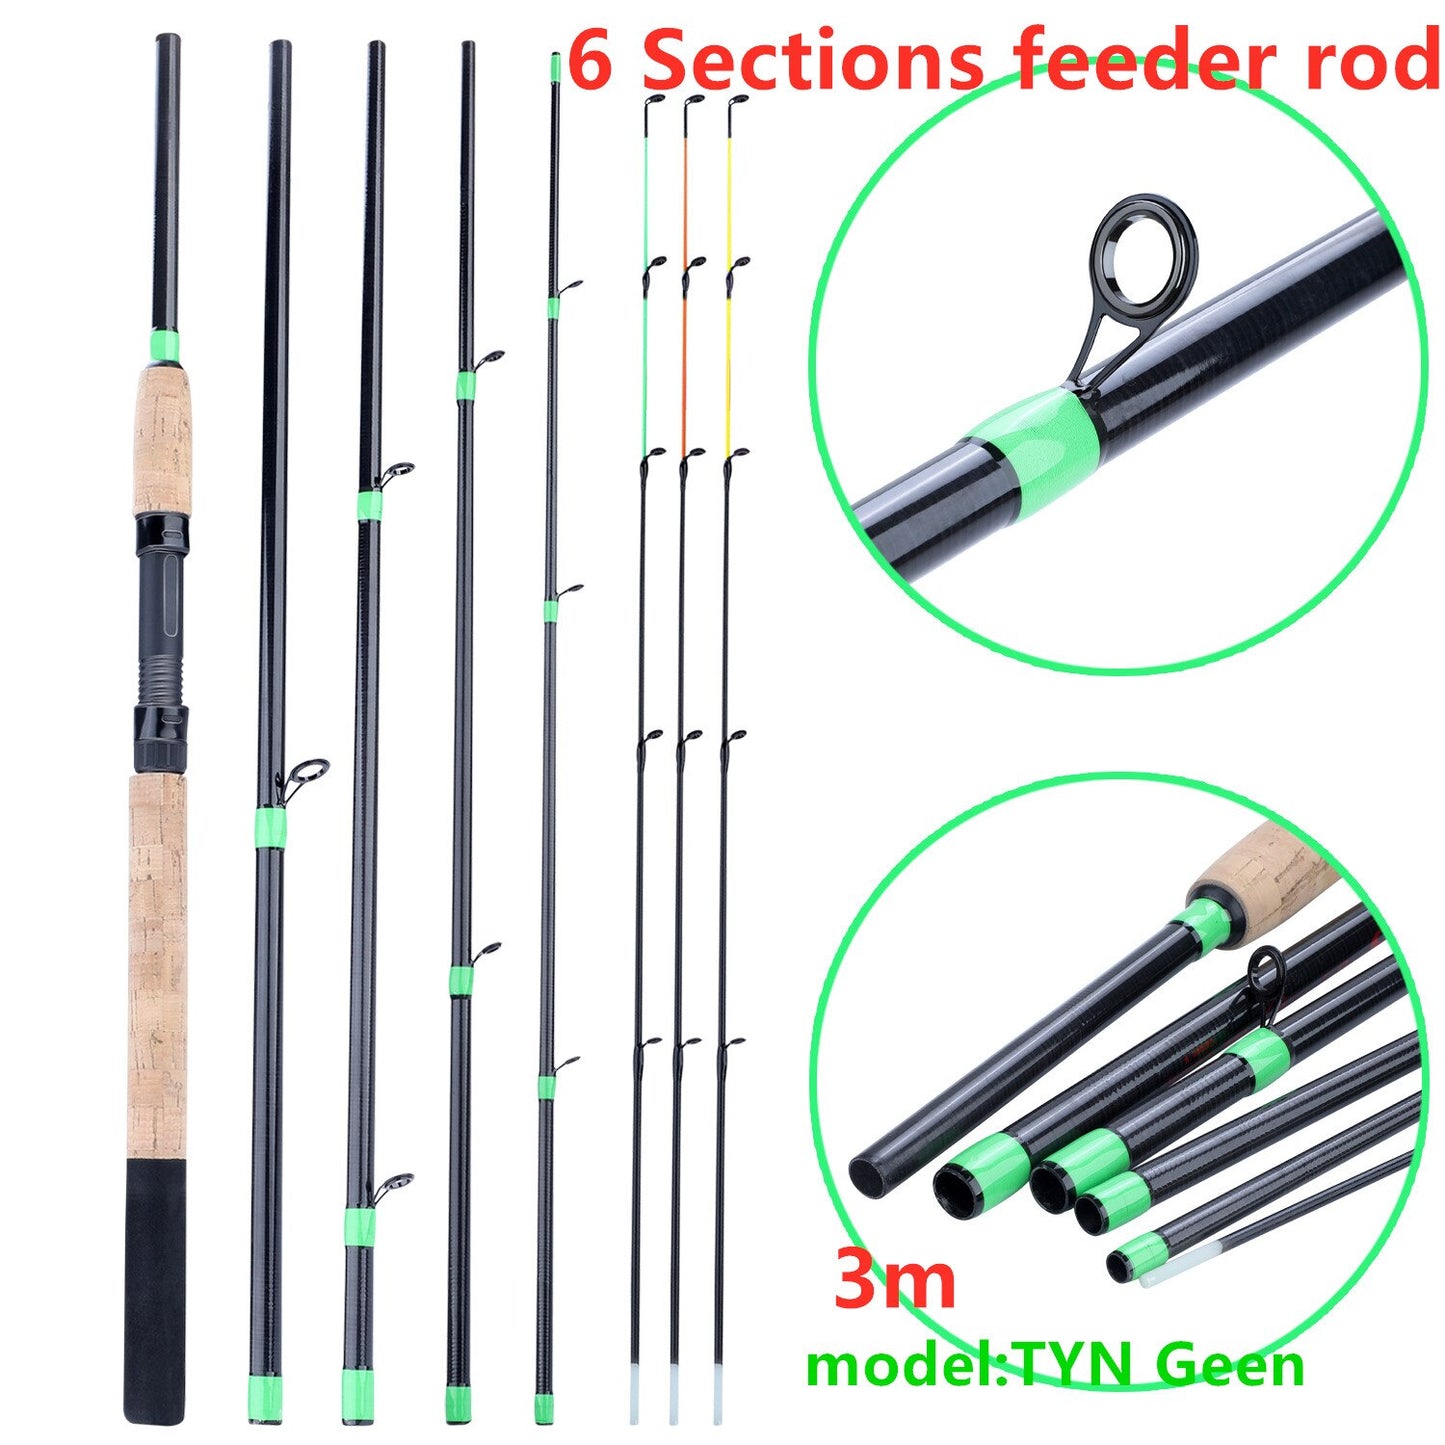 Sougayilang L M H Power Feeder Fishing Rod Spinning /6 Sections Carbon Fiber Travel Rod 3.0M 3.3M 3.6M With Free Spare Tip